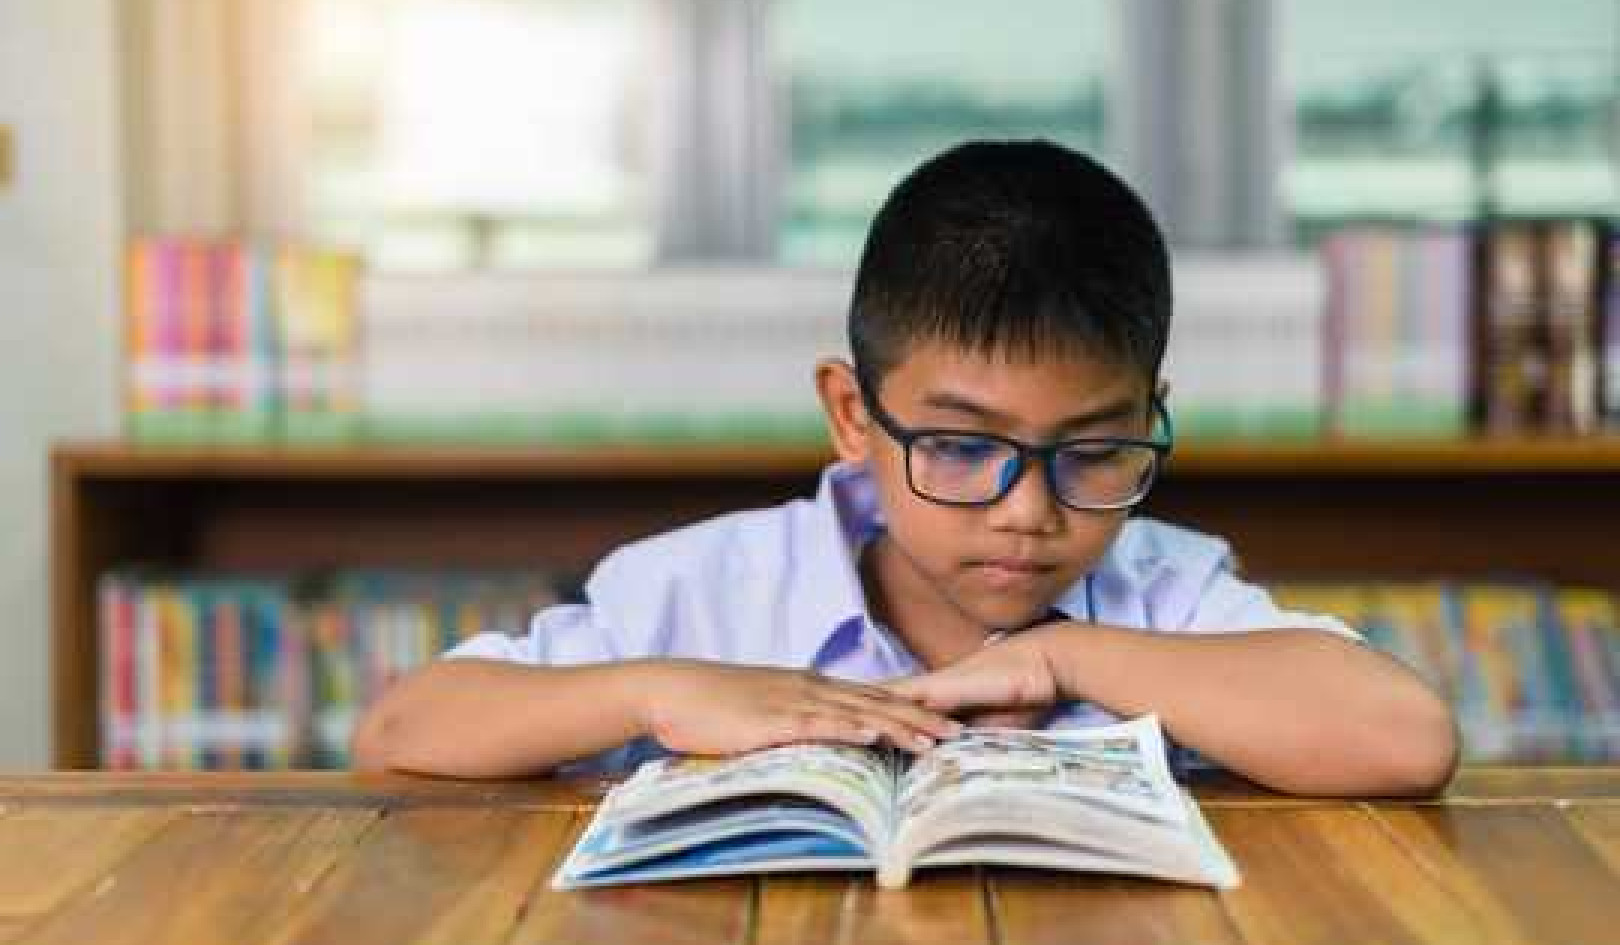 The Problems of Children Who Need Glasses and Are Not Wearing Them